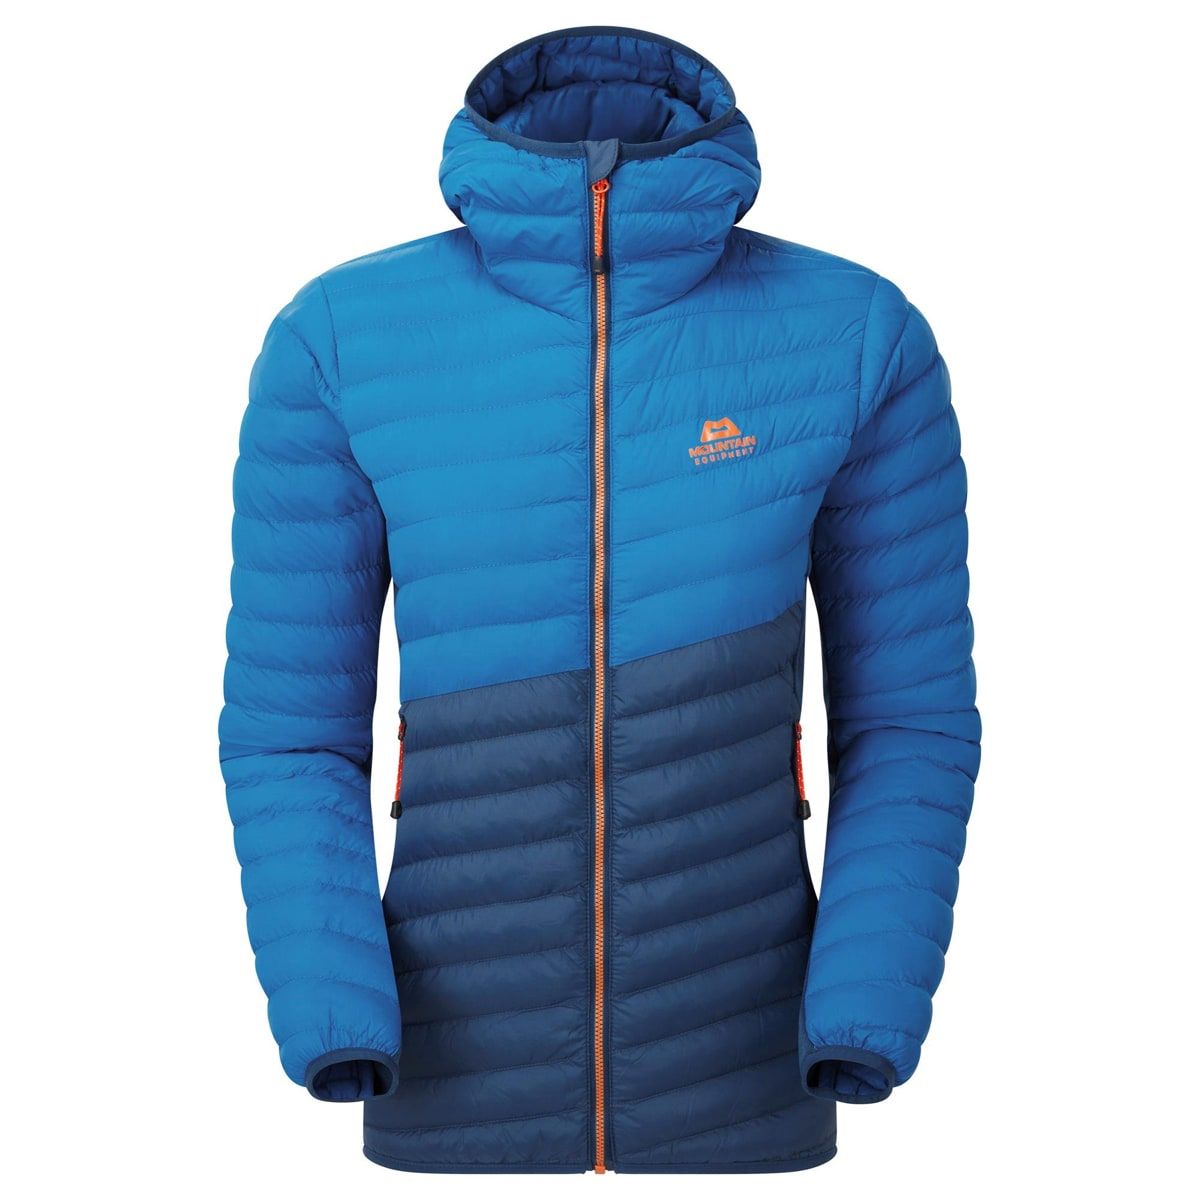 Mountain Equipment Particle Hooded Wmns Jacket Majolica Blue/Mykonos Blue